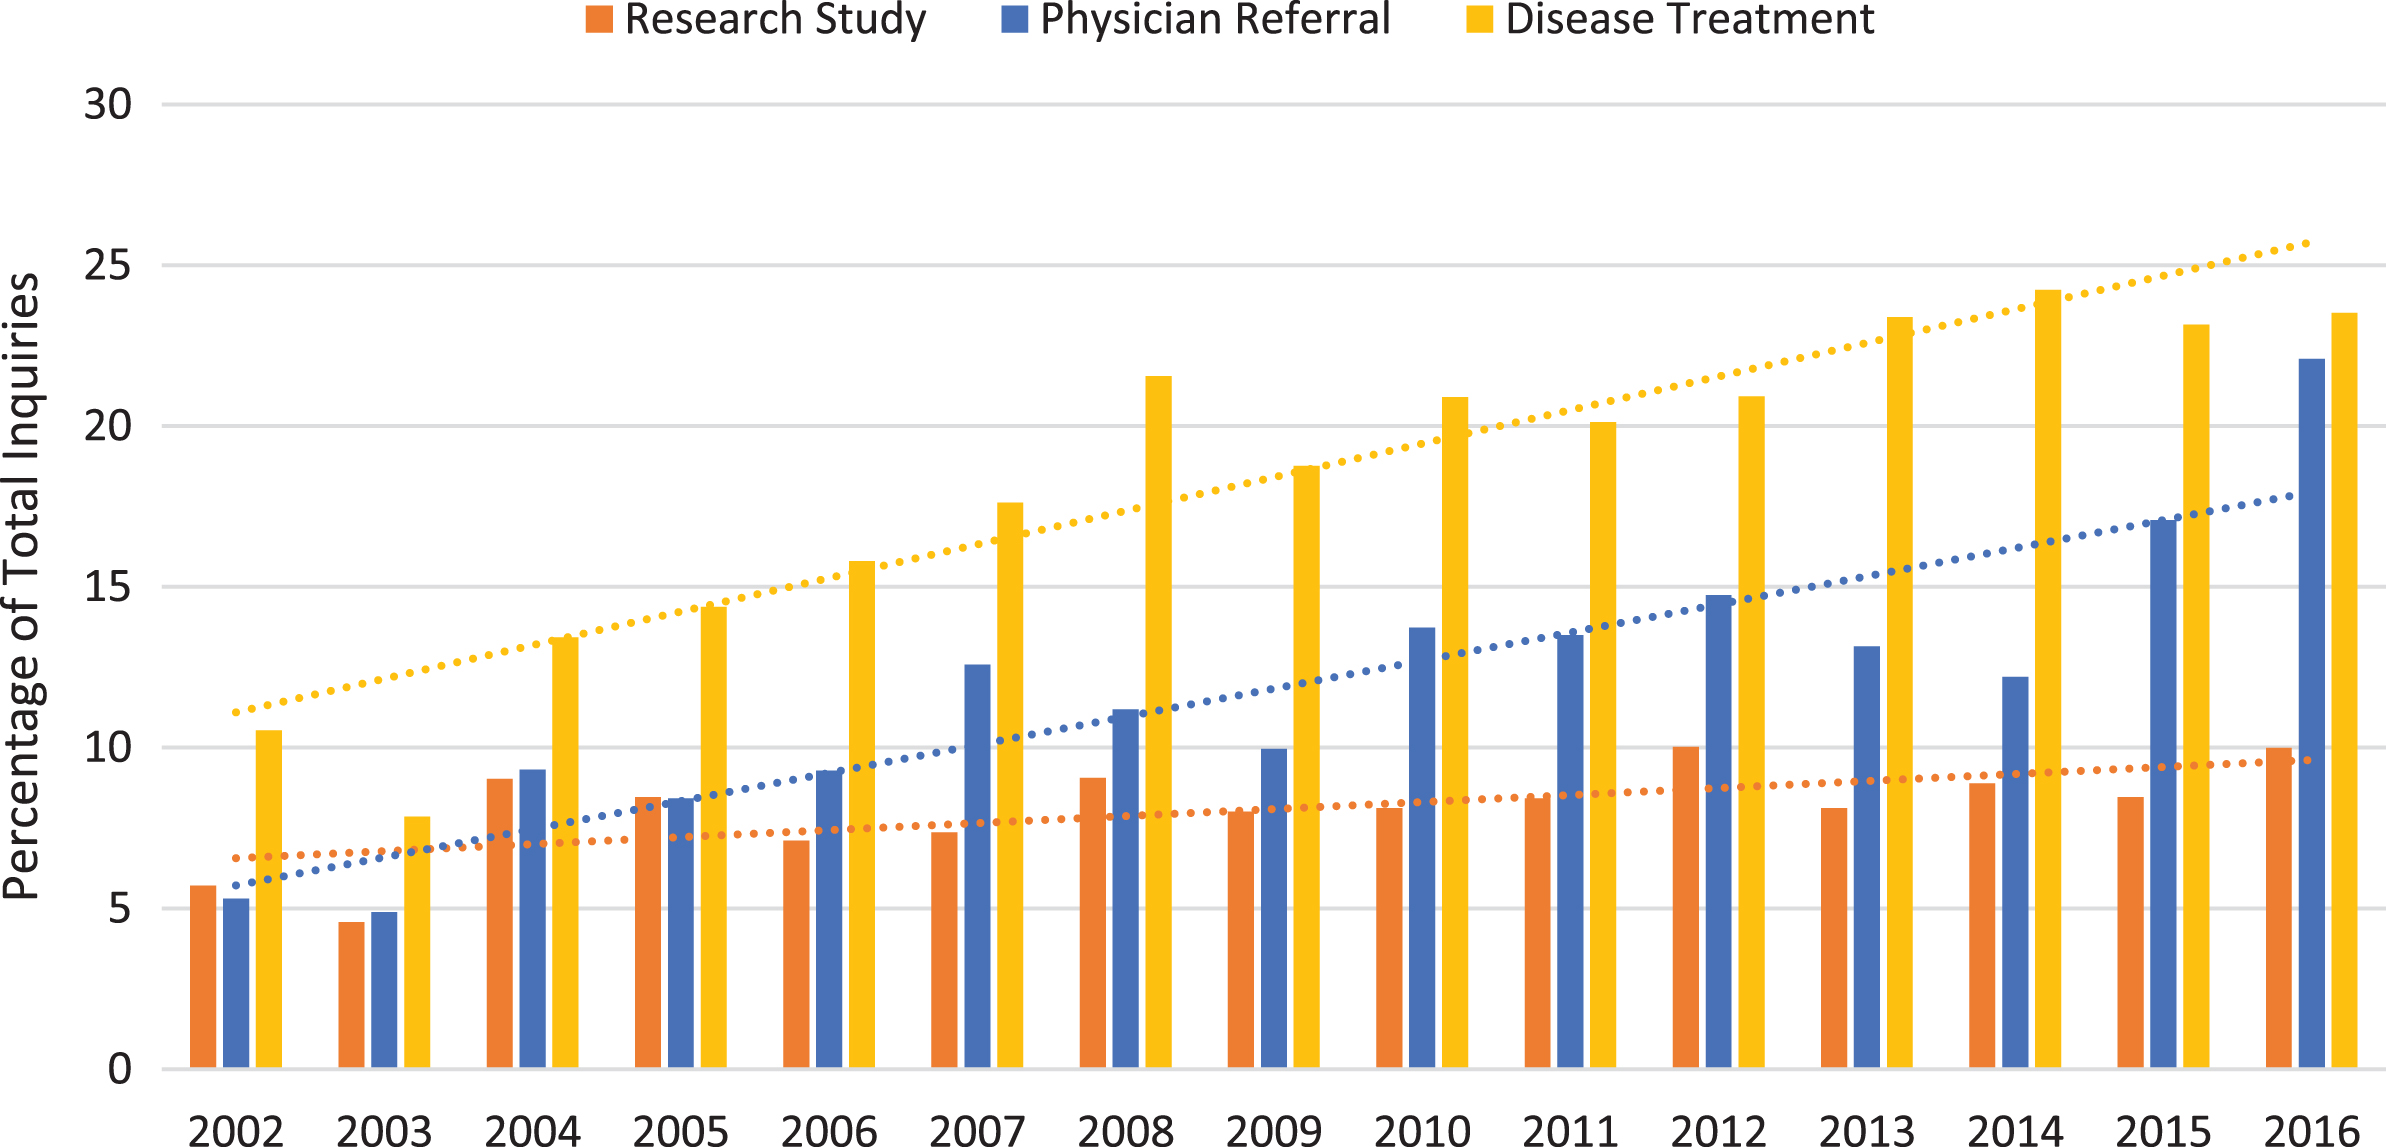 Top three reasons for GARD inquiry, 2002–2016. These are the topics for which people have asked about the most about over 15 years. There has been a significant increase each year in questions from people looking for treatment information and for help finding an expert in their disease. Questions about learning more about or participating in research have remained relatively steady.